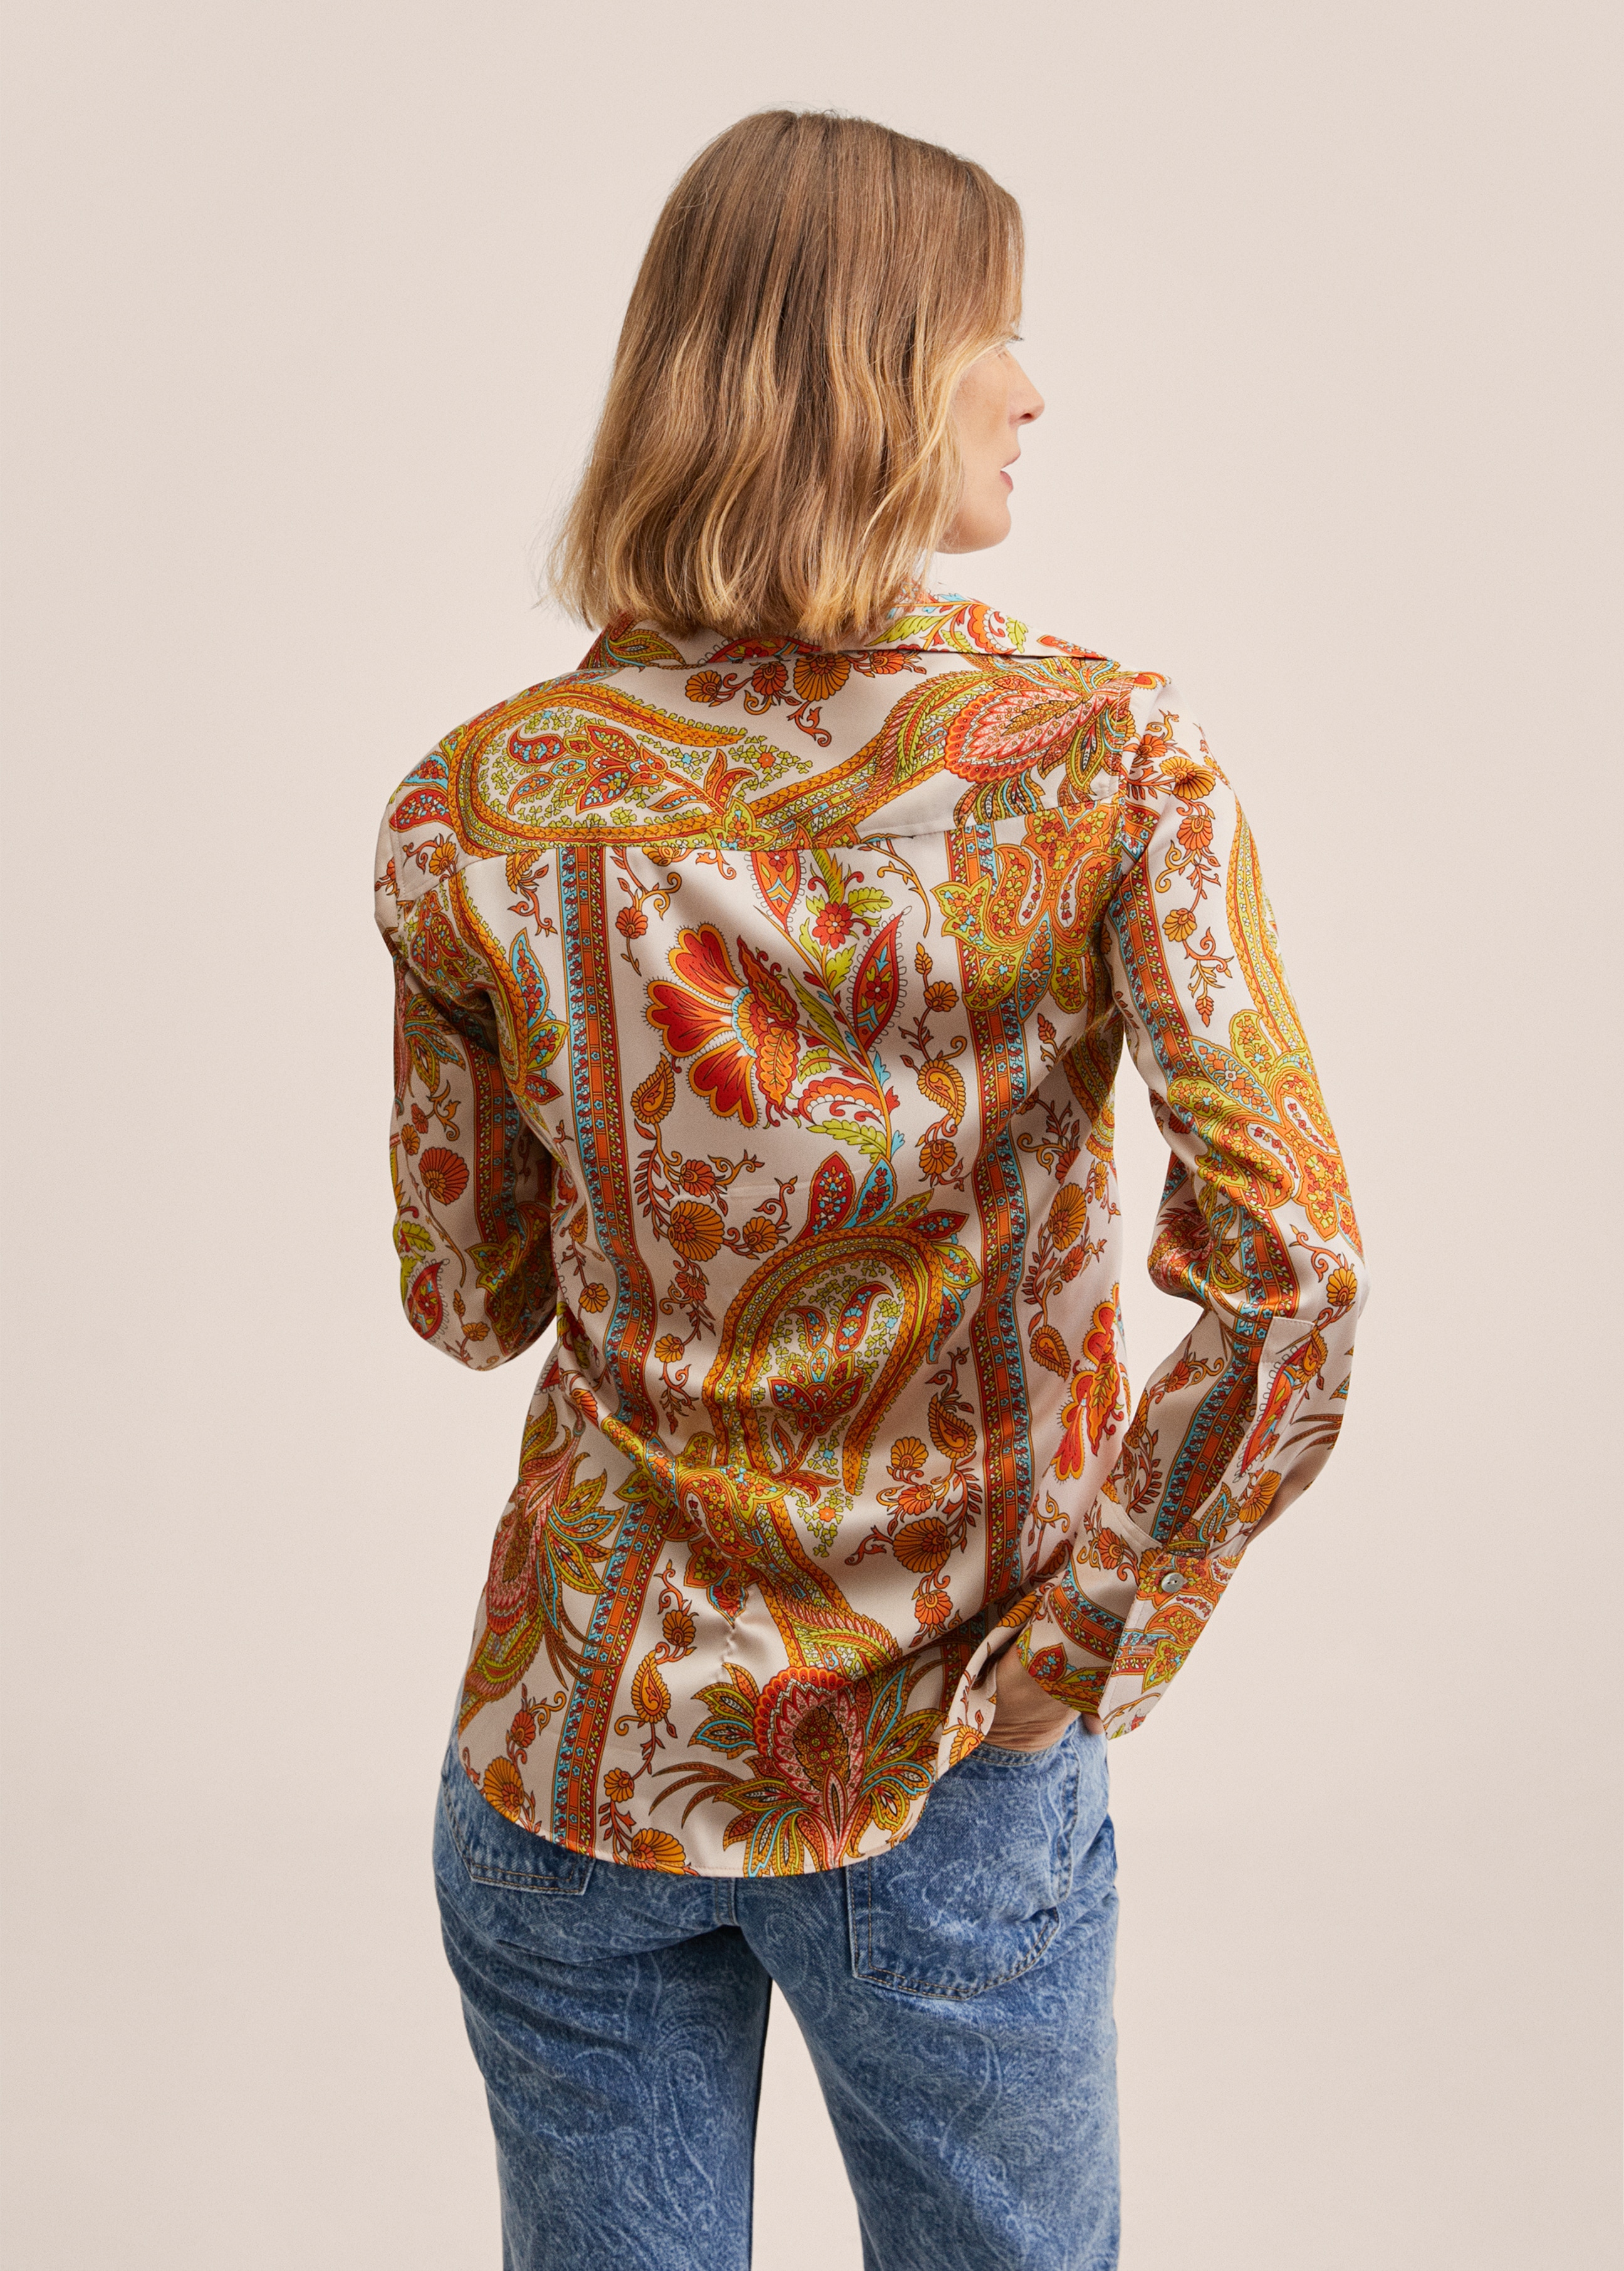 Paisley print shirt - Reverse of the article